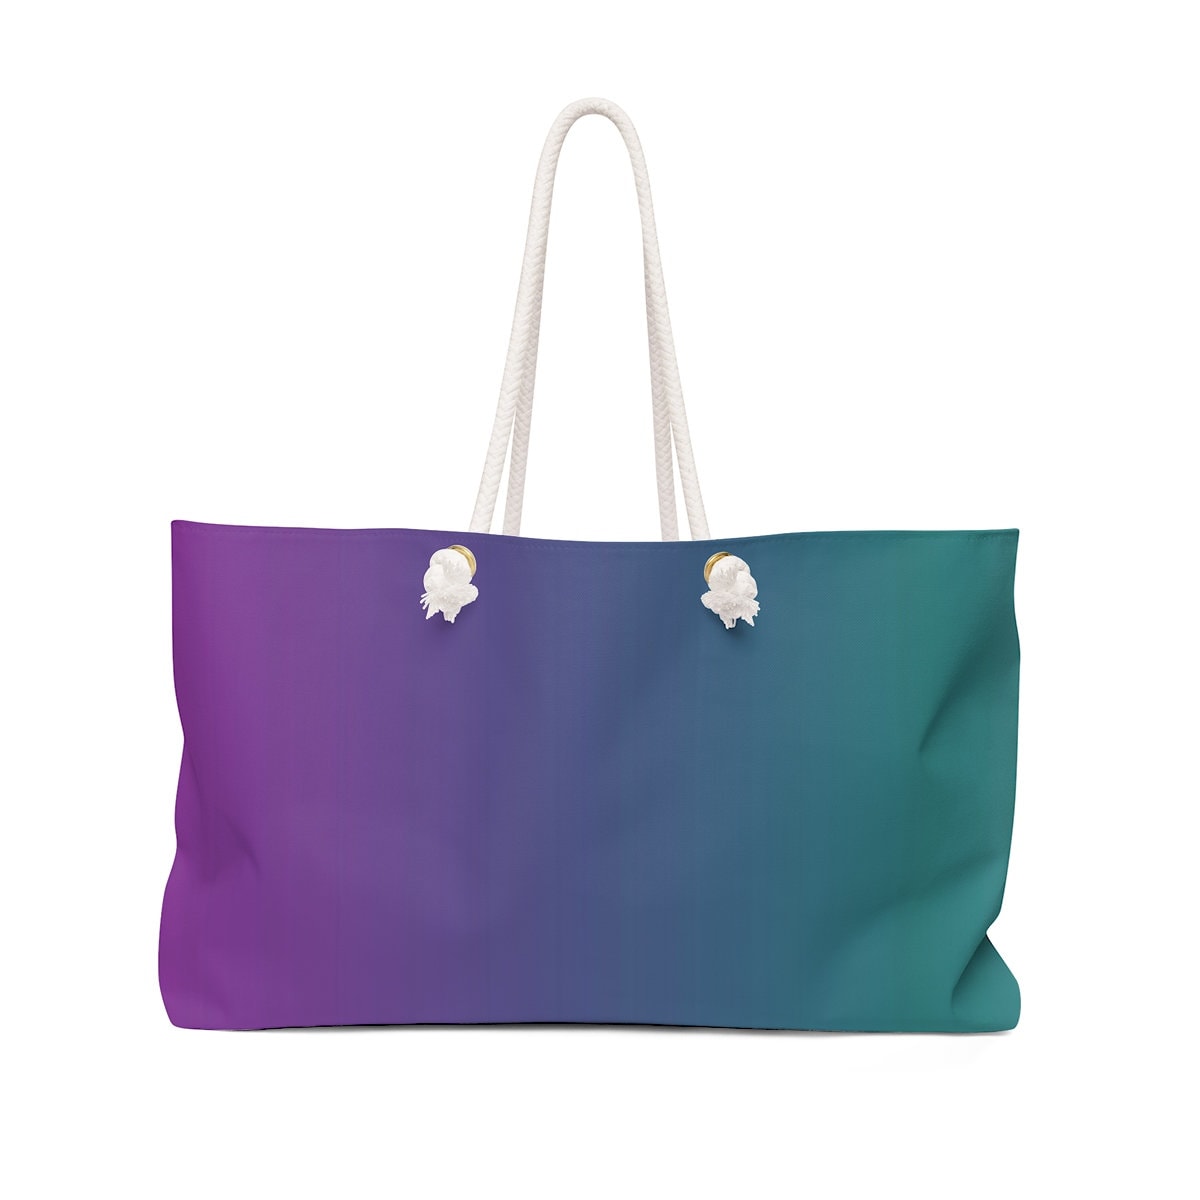 BEACH BAG Purple Ombre Tote Weekender Bag Teal Ombre Oversized